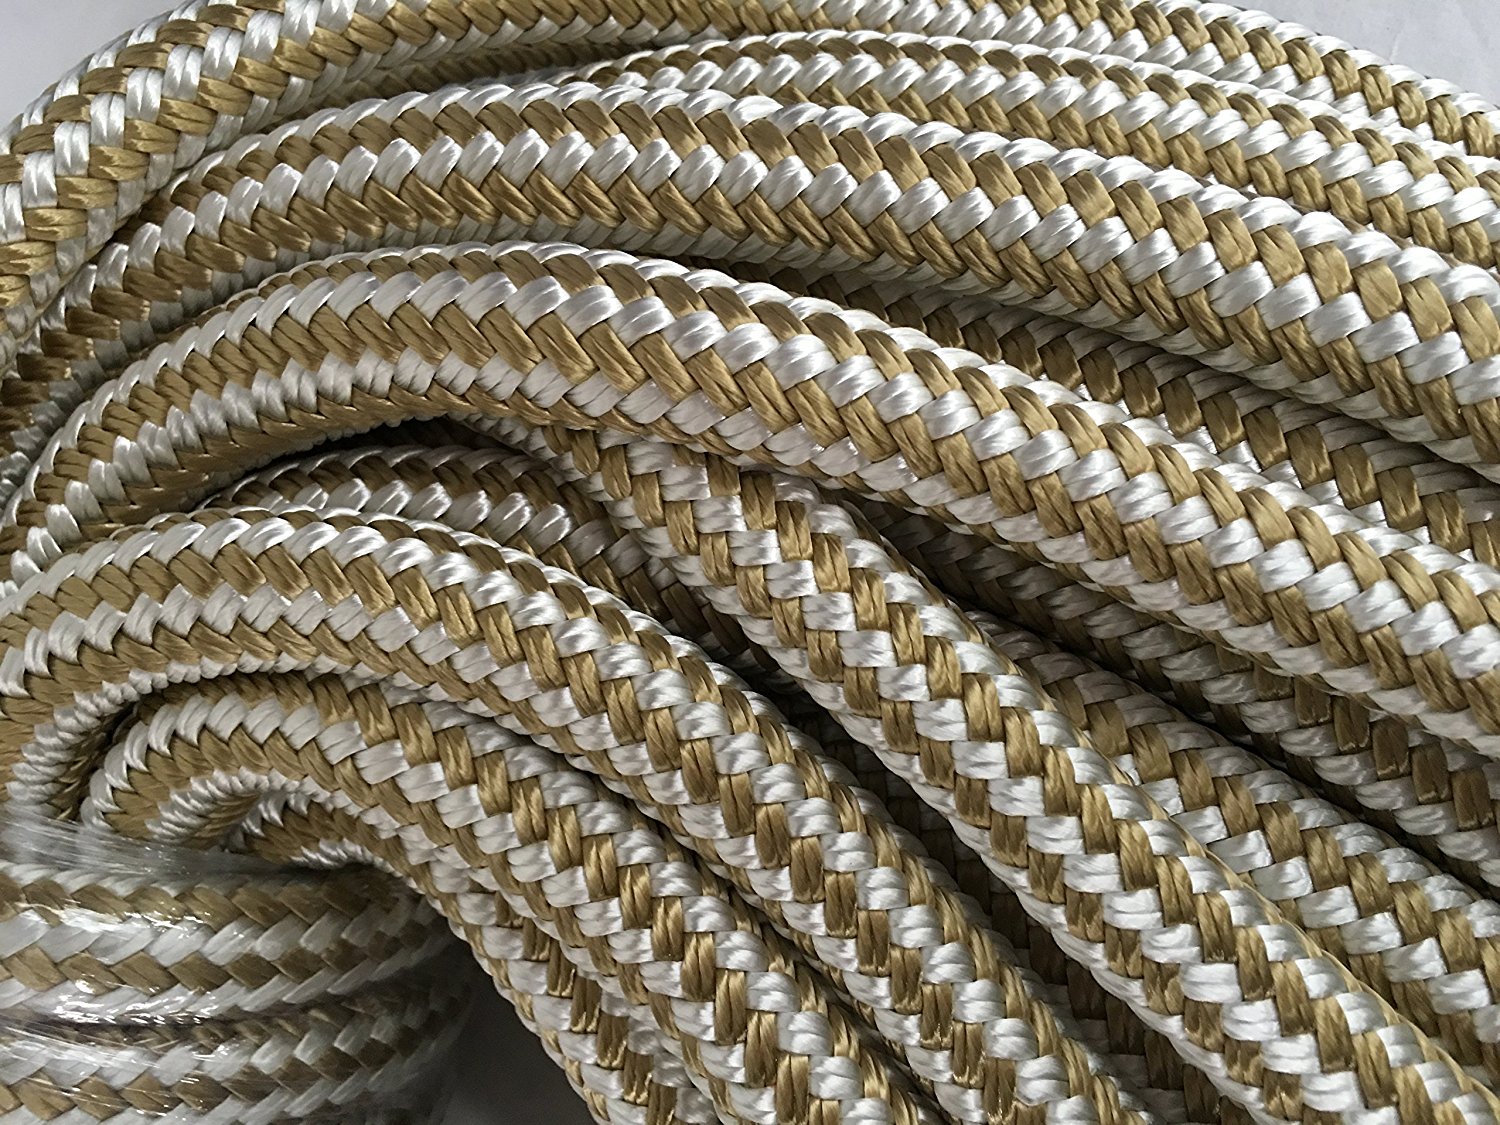 50 Feet NEW 3/4" Double Braid Rope 17400Lbs BREAKING STRENGTH NEW 2018 stock 